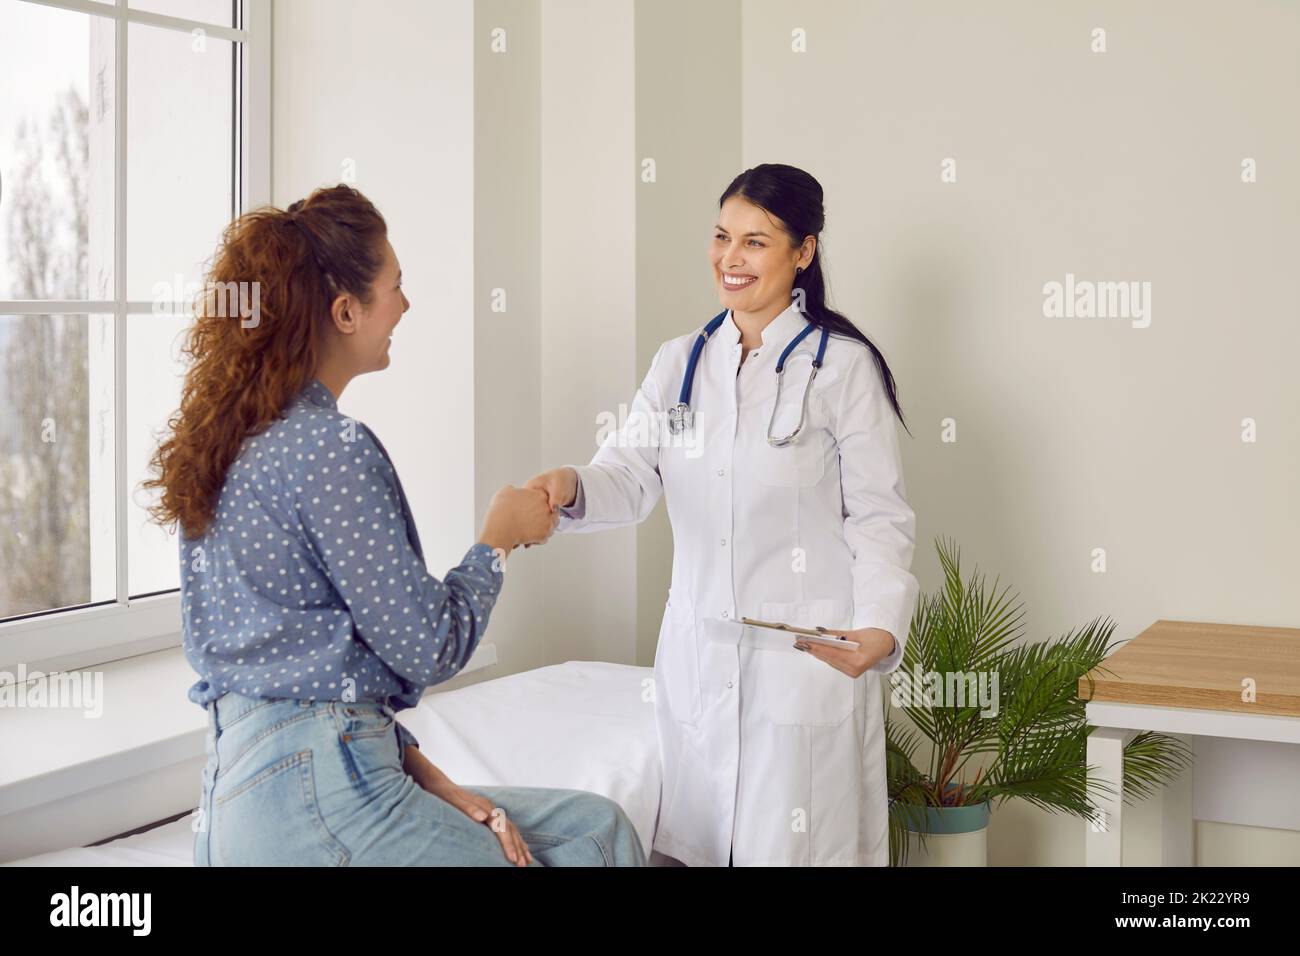 Friendly female doctor shakes hands with her patient welcoming her to appointment in her office. Stock Photo